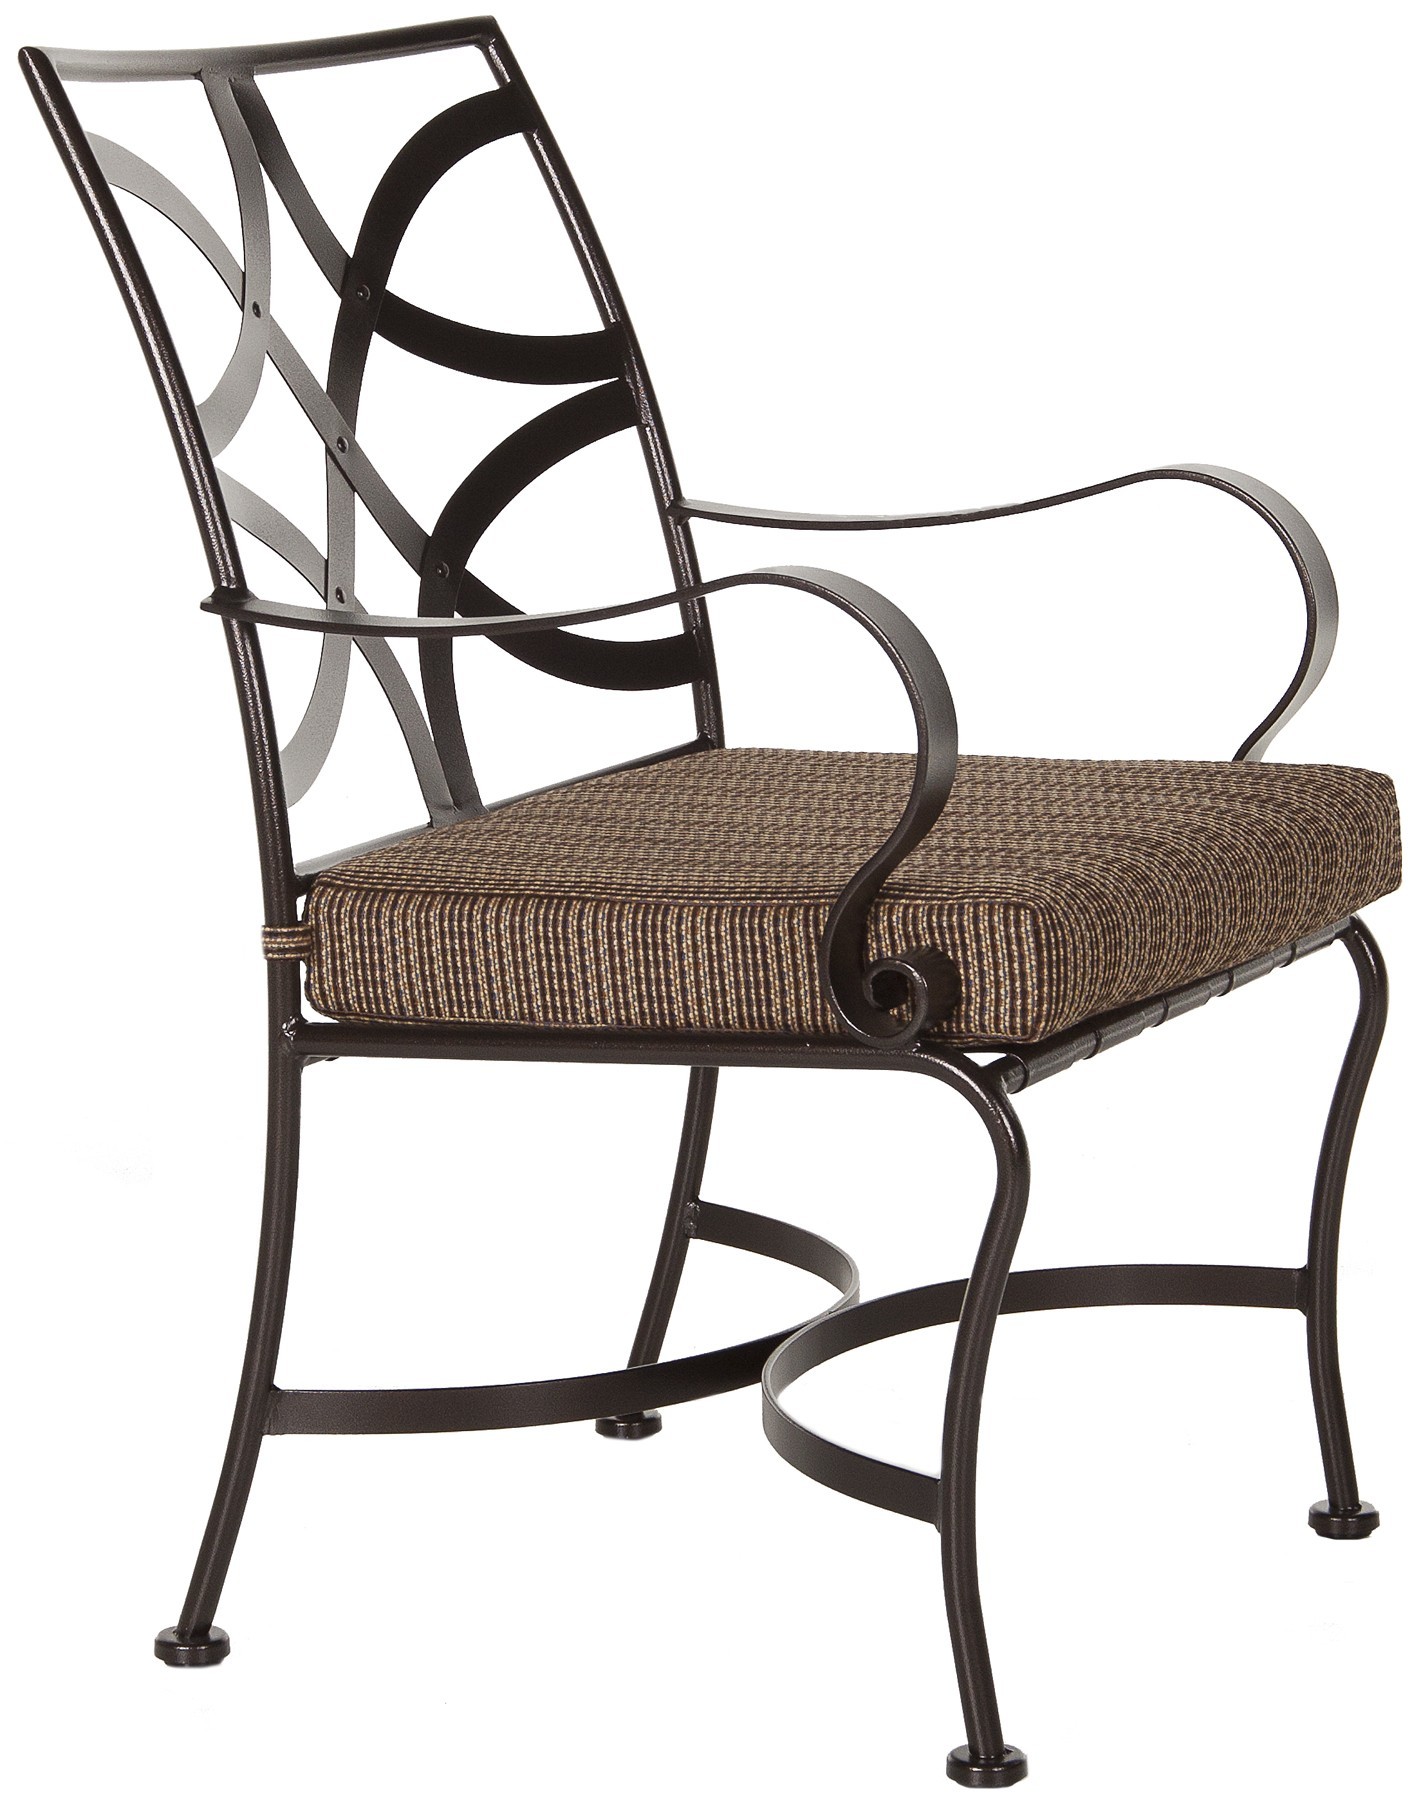 Wrought Iron Patio Furniture - Hausers Patio